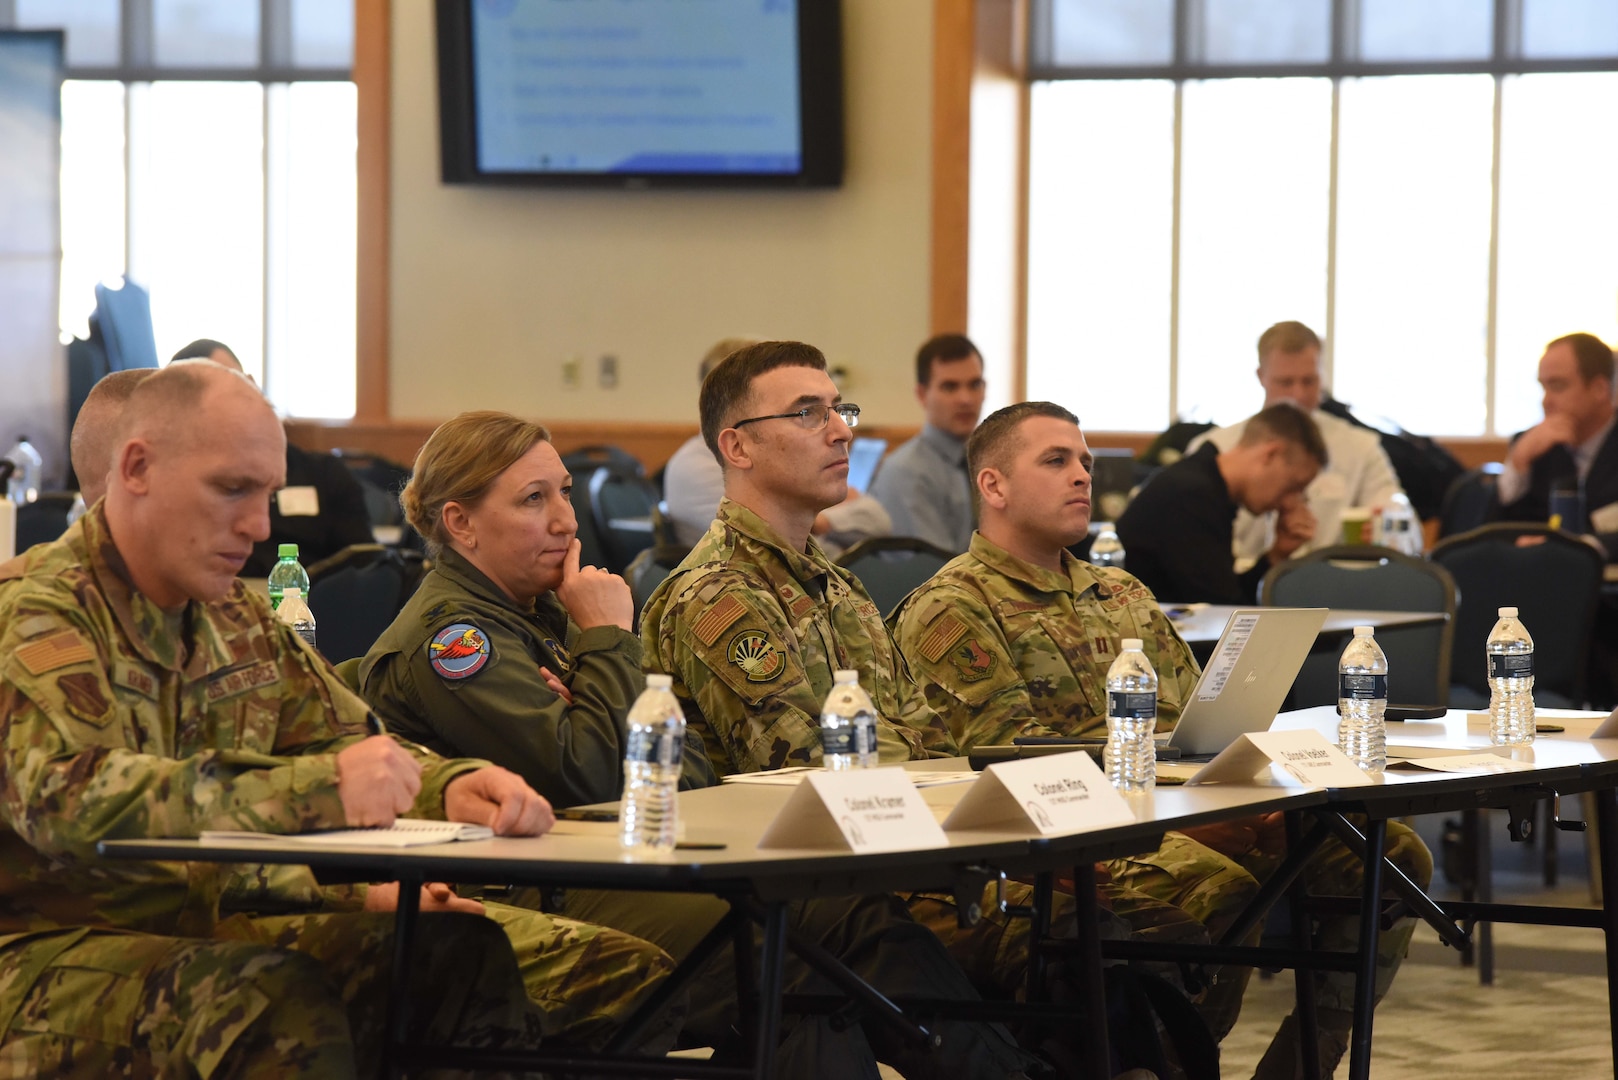 Michigan Air National Guard leaders from various units attend a Michigan Air National Guard and Kelly Johnson Joint All-Domain Innovation Center Pitch Day, where Guard members proposed solutions to problems, Selfridge Air National Guard Base, Michigan, April 14, 2022.